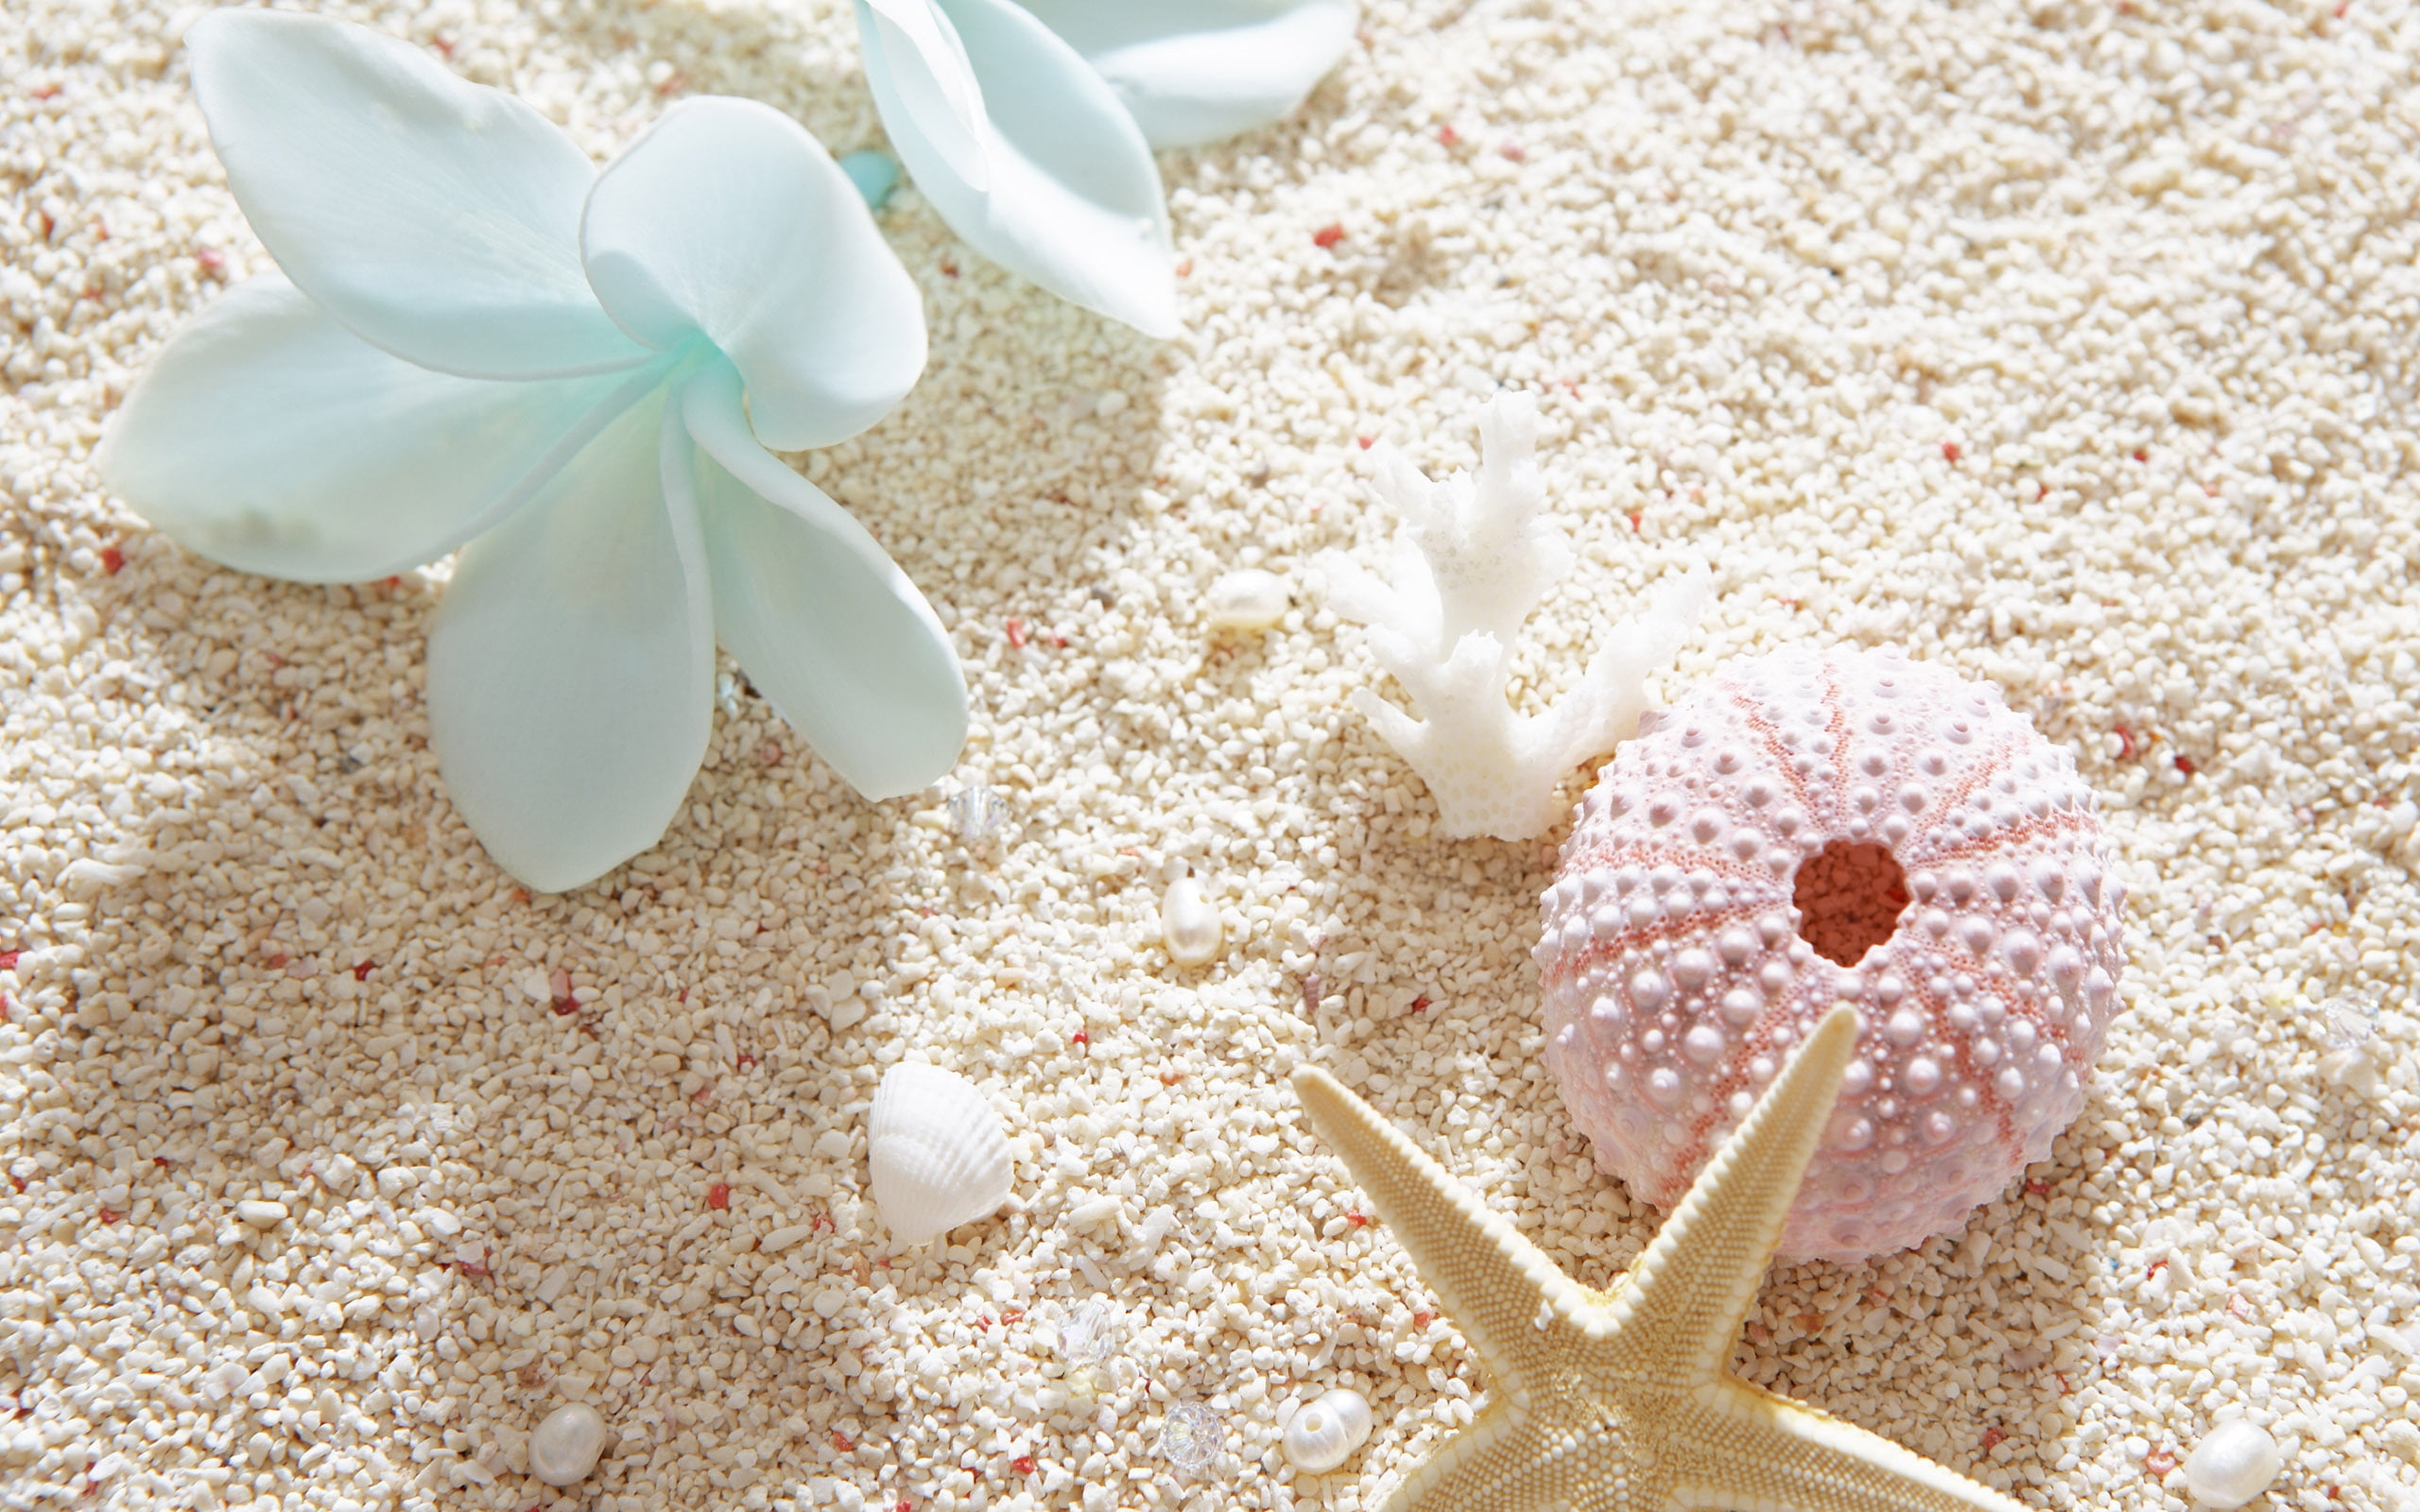 person taking photo of pink sea corral with star fish on white sand